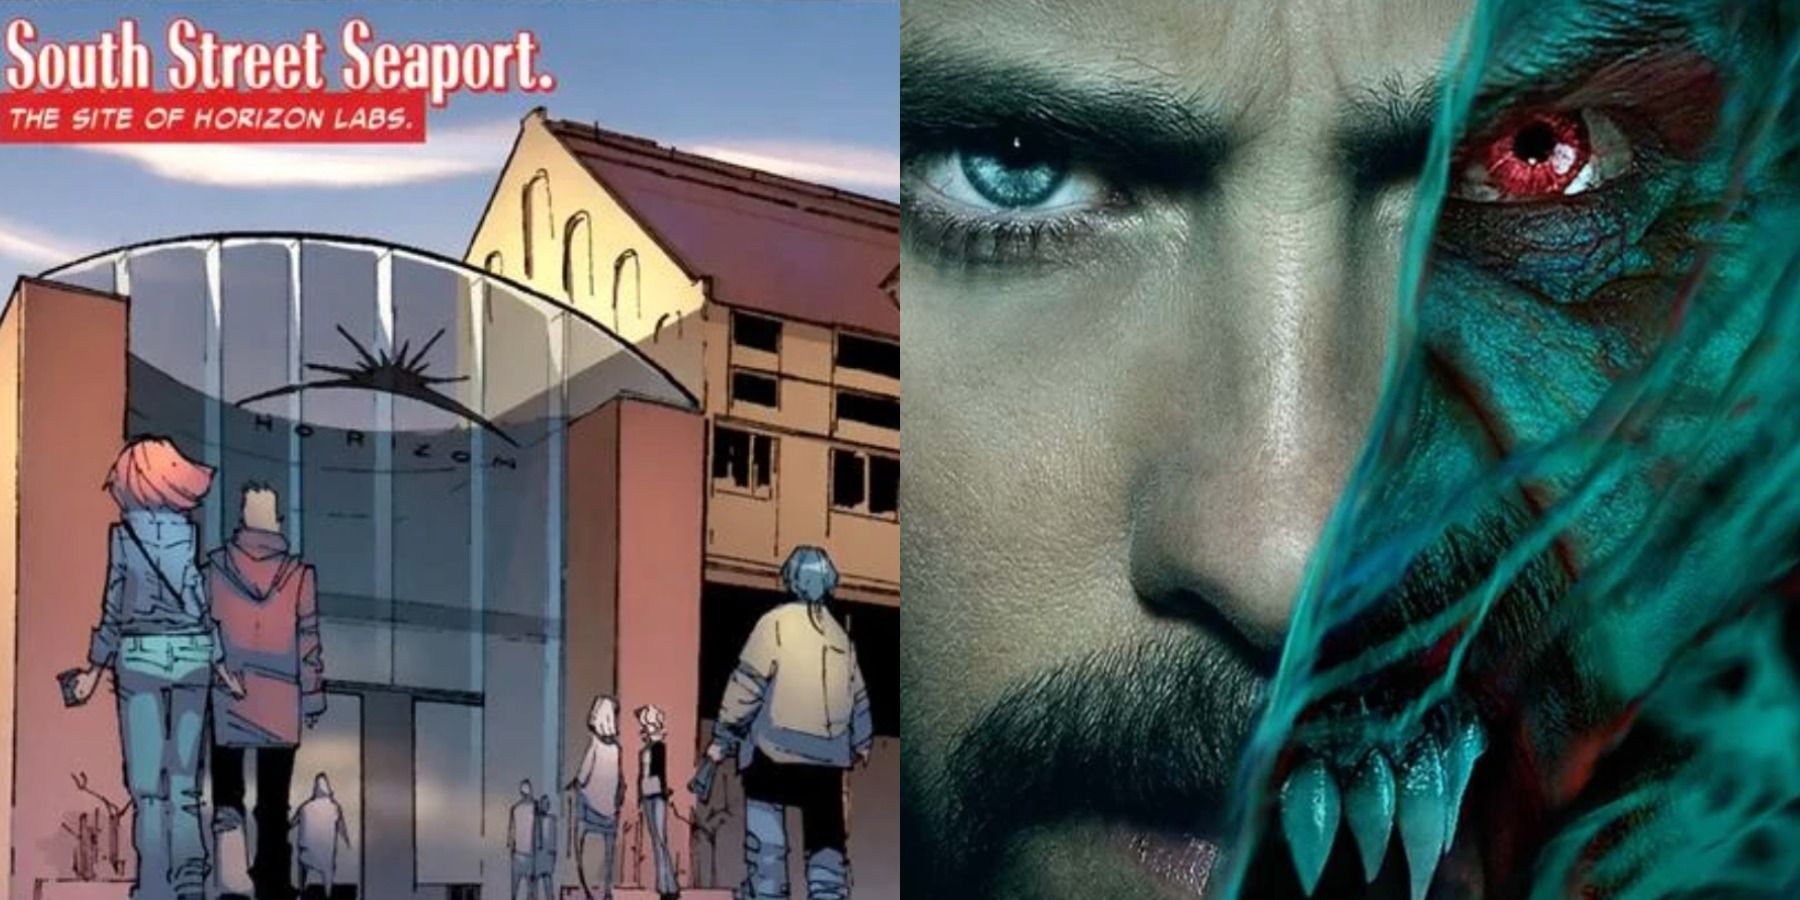 A split image depicts Horizon Labs in Marvel comics and Morbius in a promotional image from the Sony movie